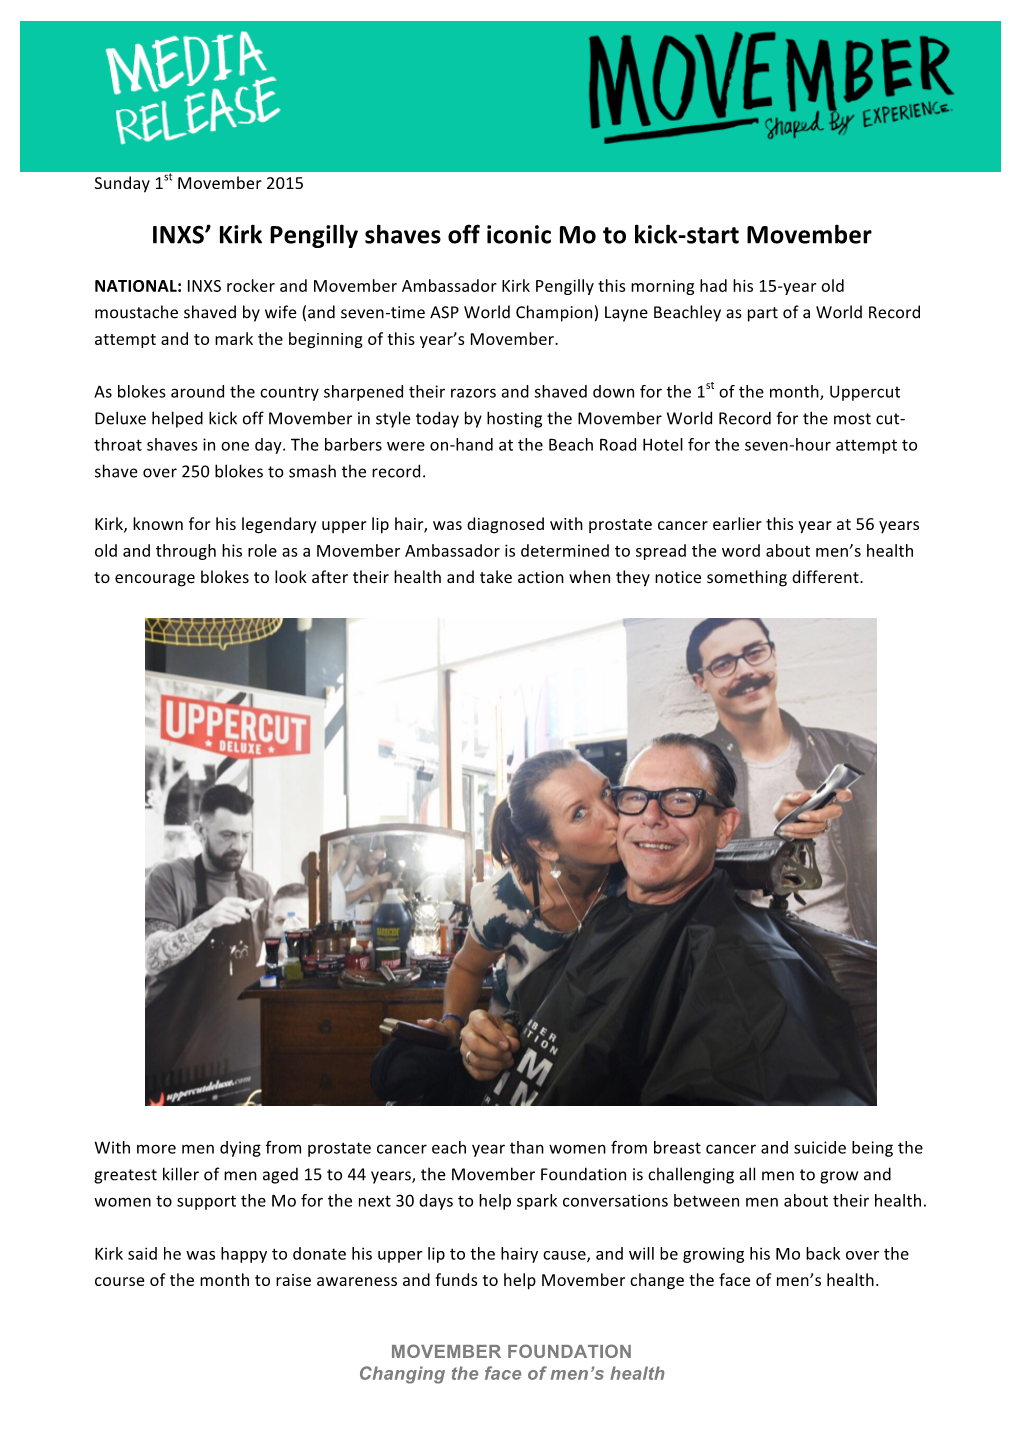 INXS' Kirk Pengilly Shaves Off Iconic Mo to Kick-Start Movember